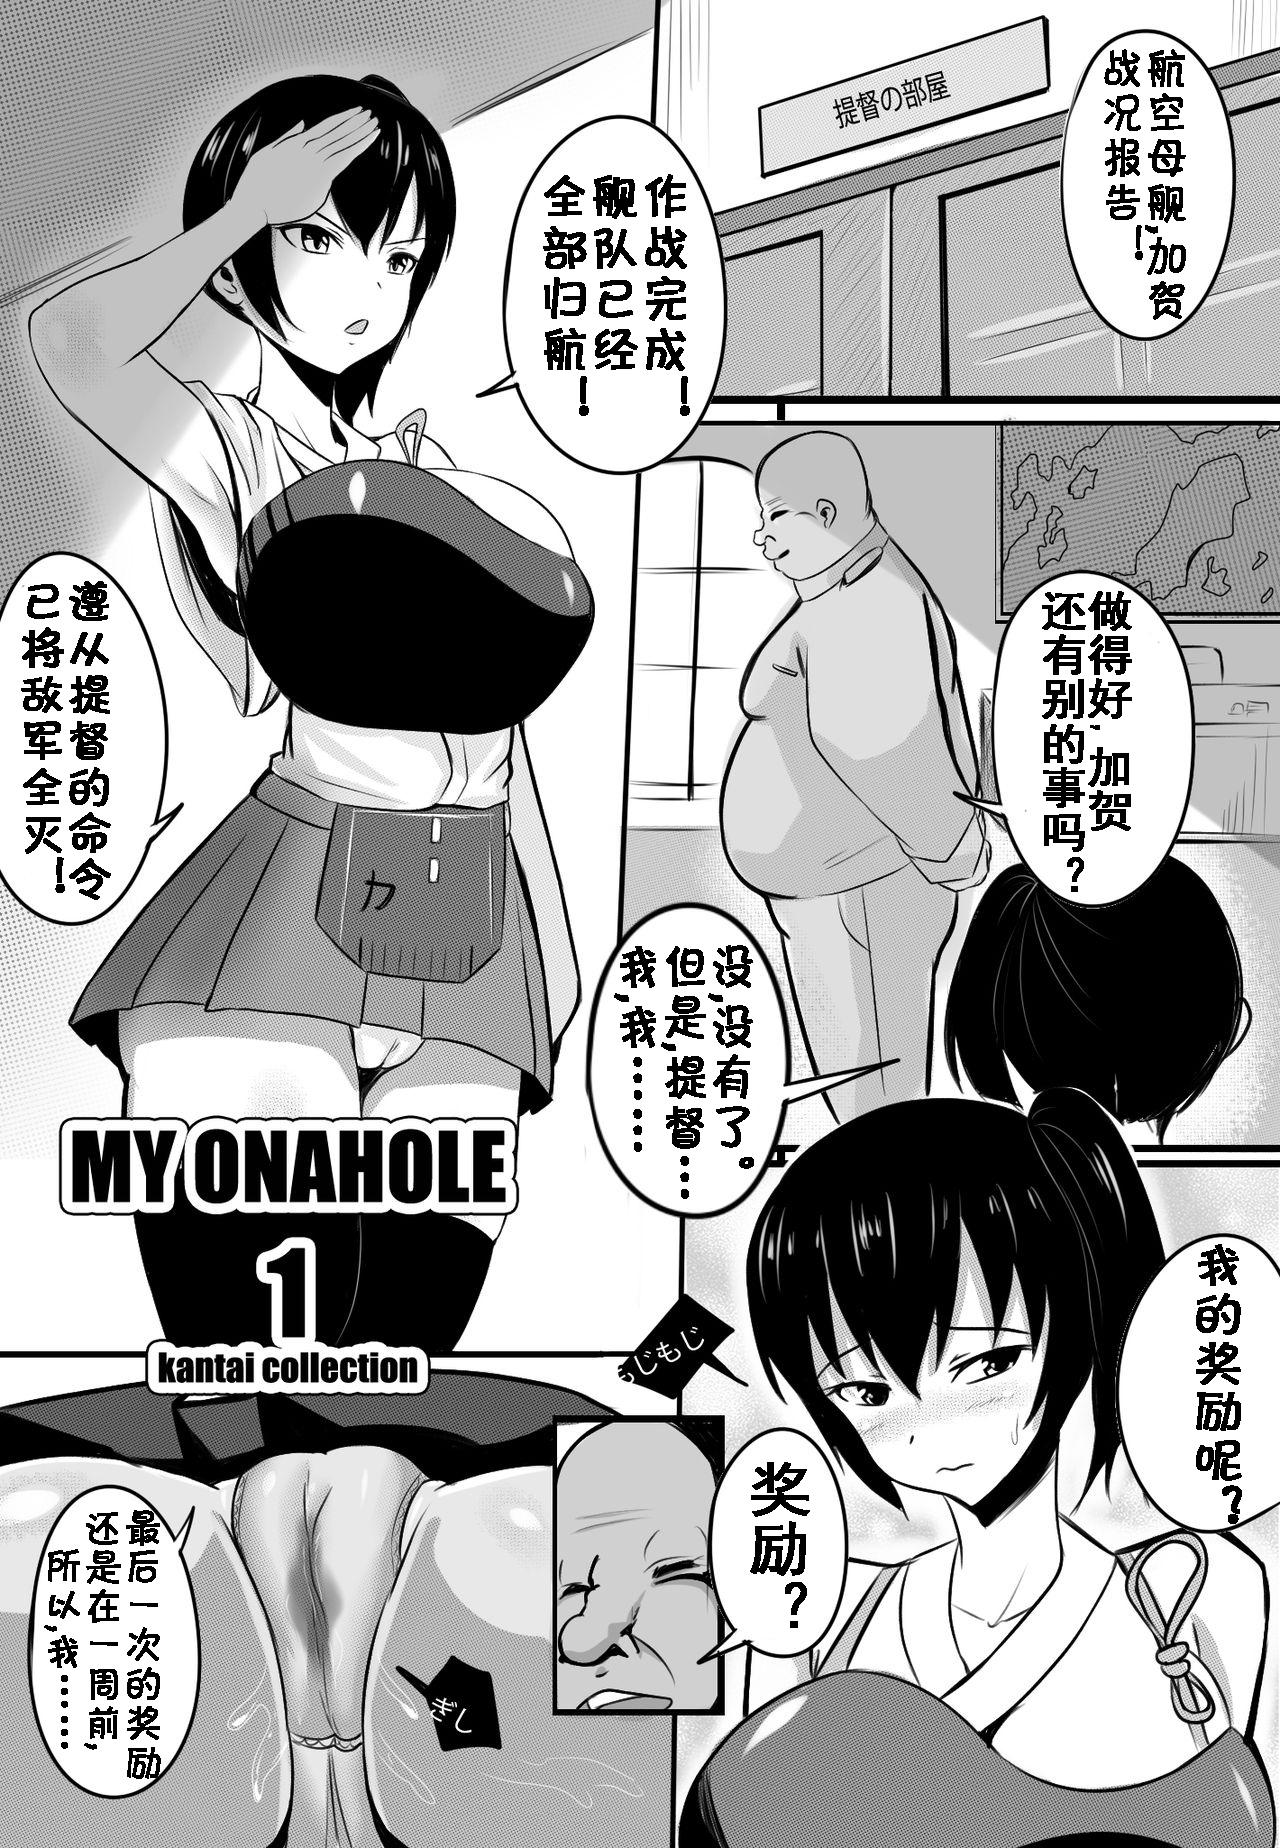 Blowjob My Onahole 1 - Kantai collection Anime - Page 3